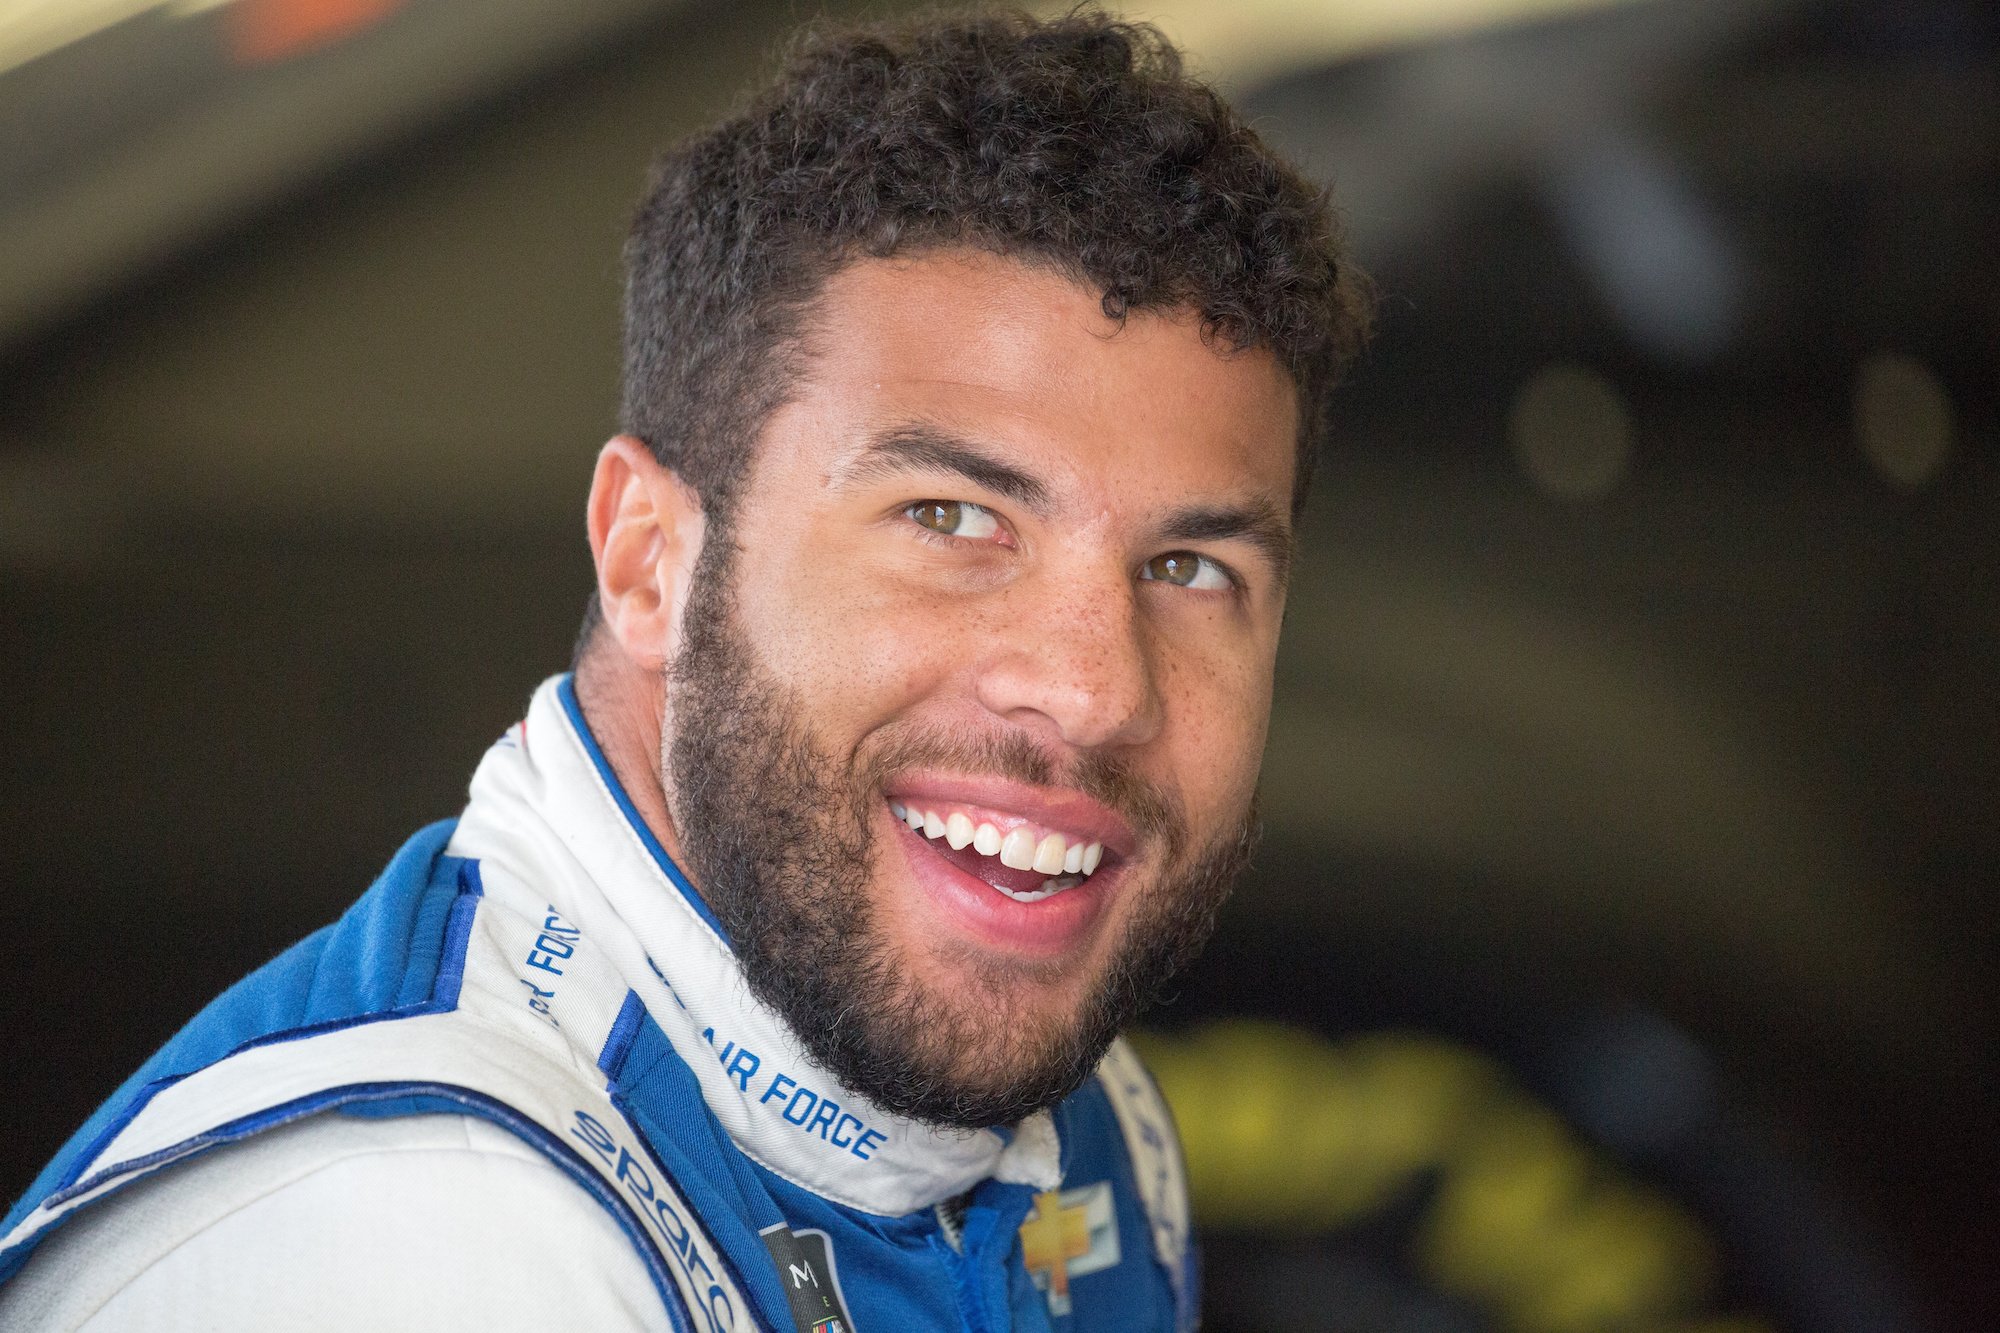 Bubba Wallace smiling, looking to the side of the camera